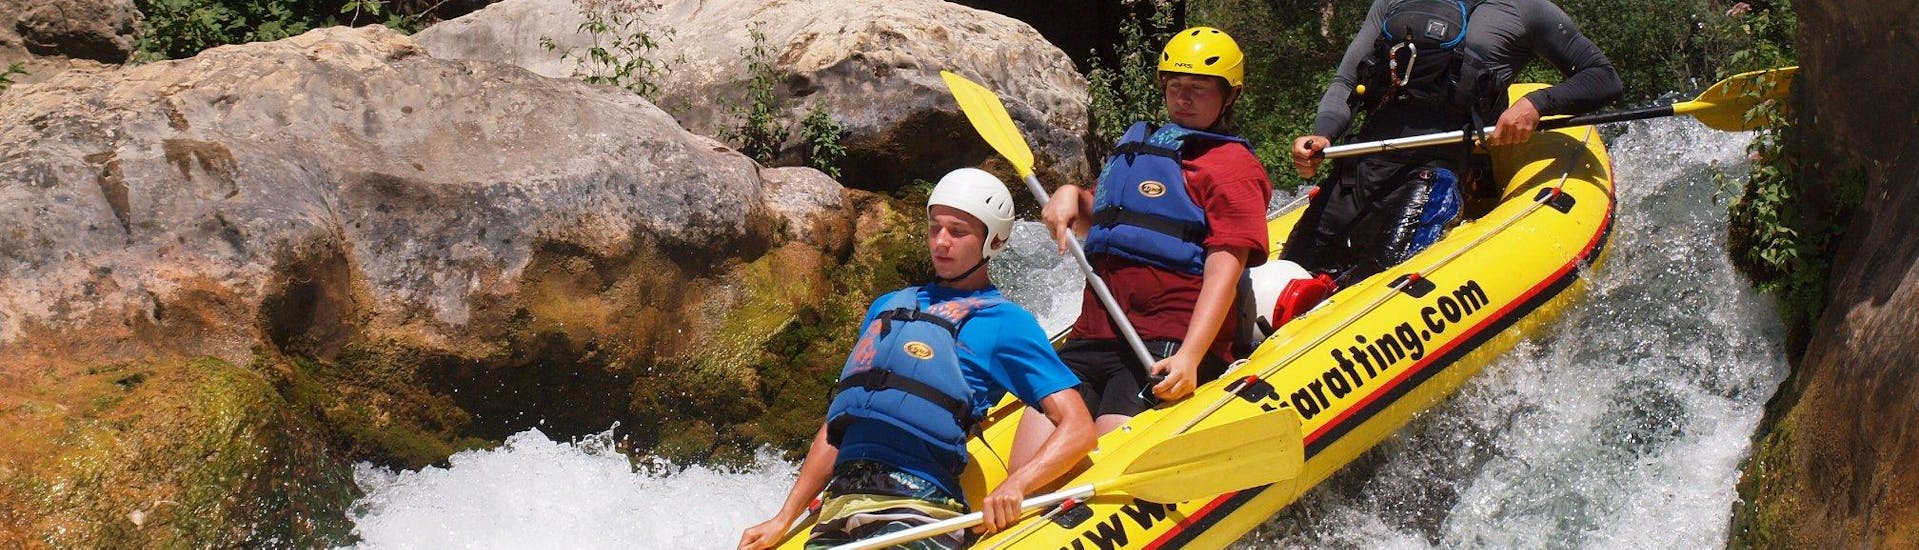 Two people on a mini raft during the Action Rafting in Mini Rafts on the Cetina River with Dalmatia Rafting.